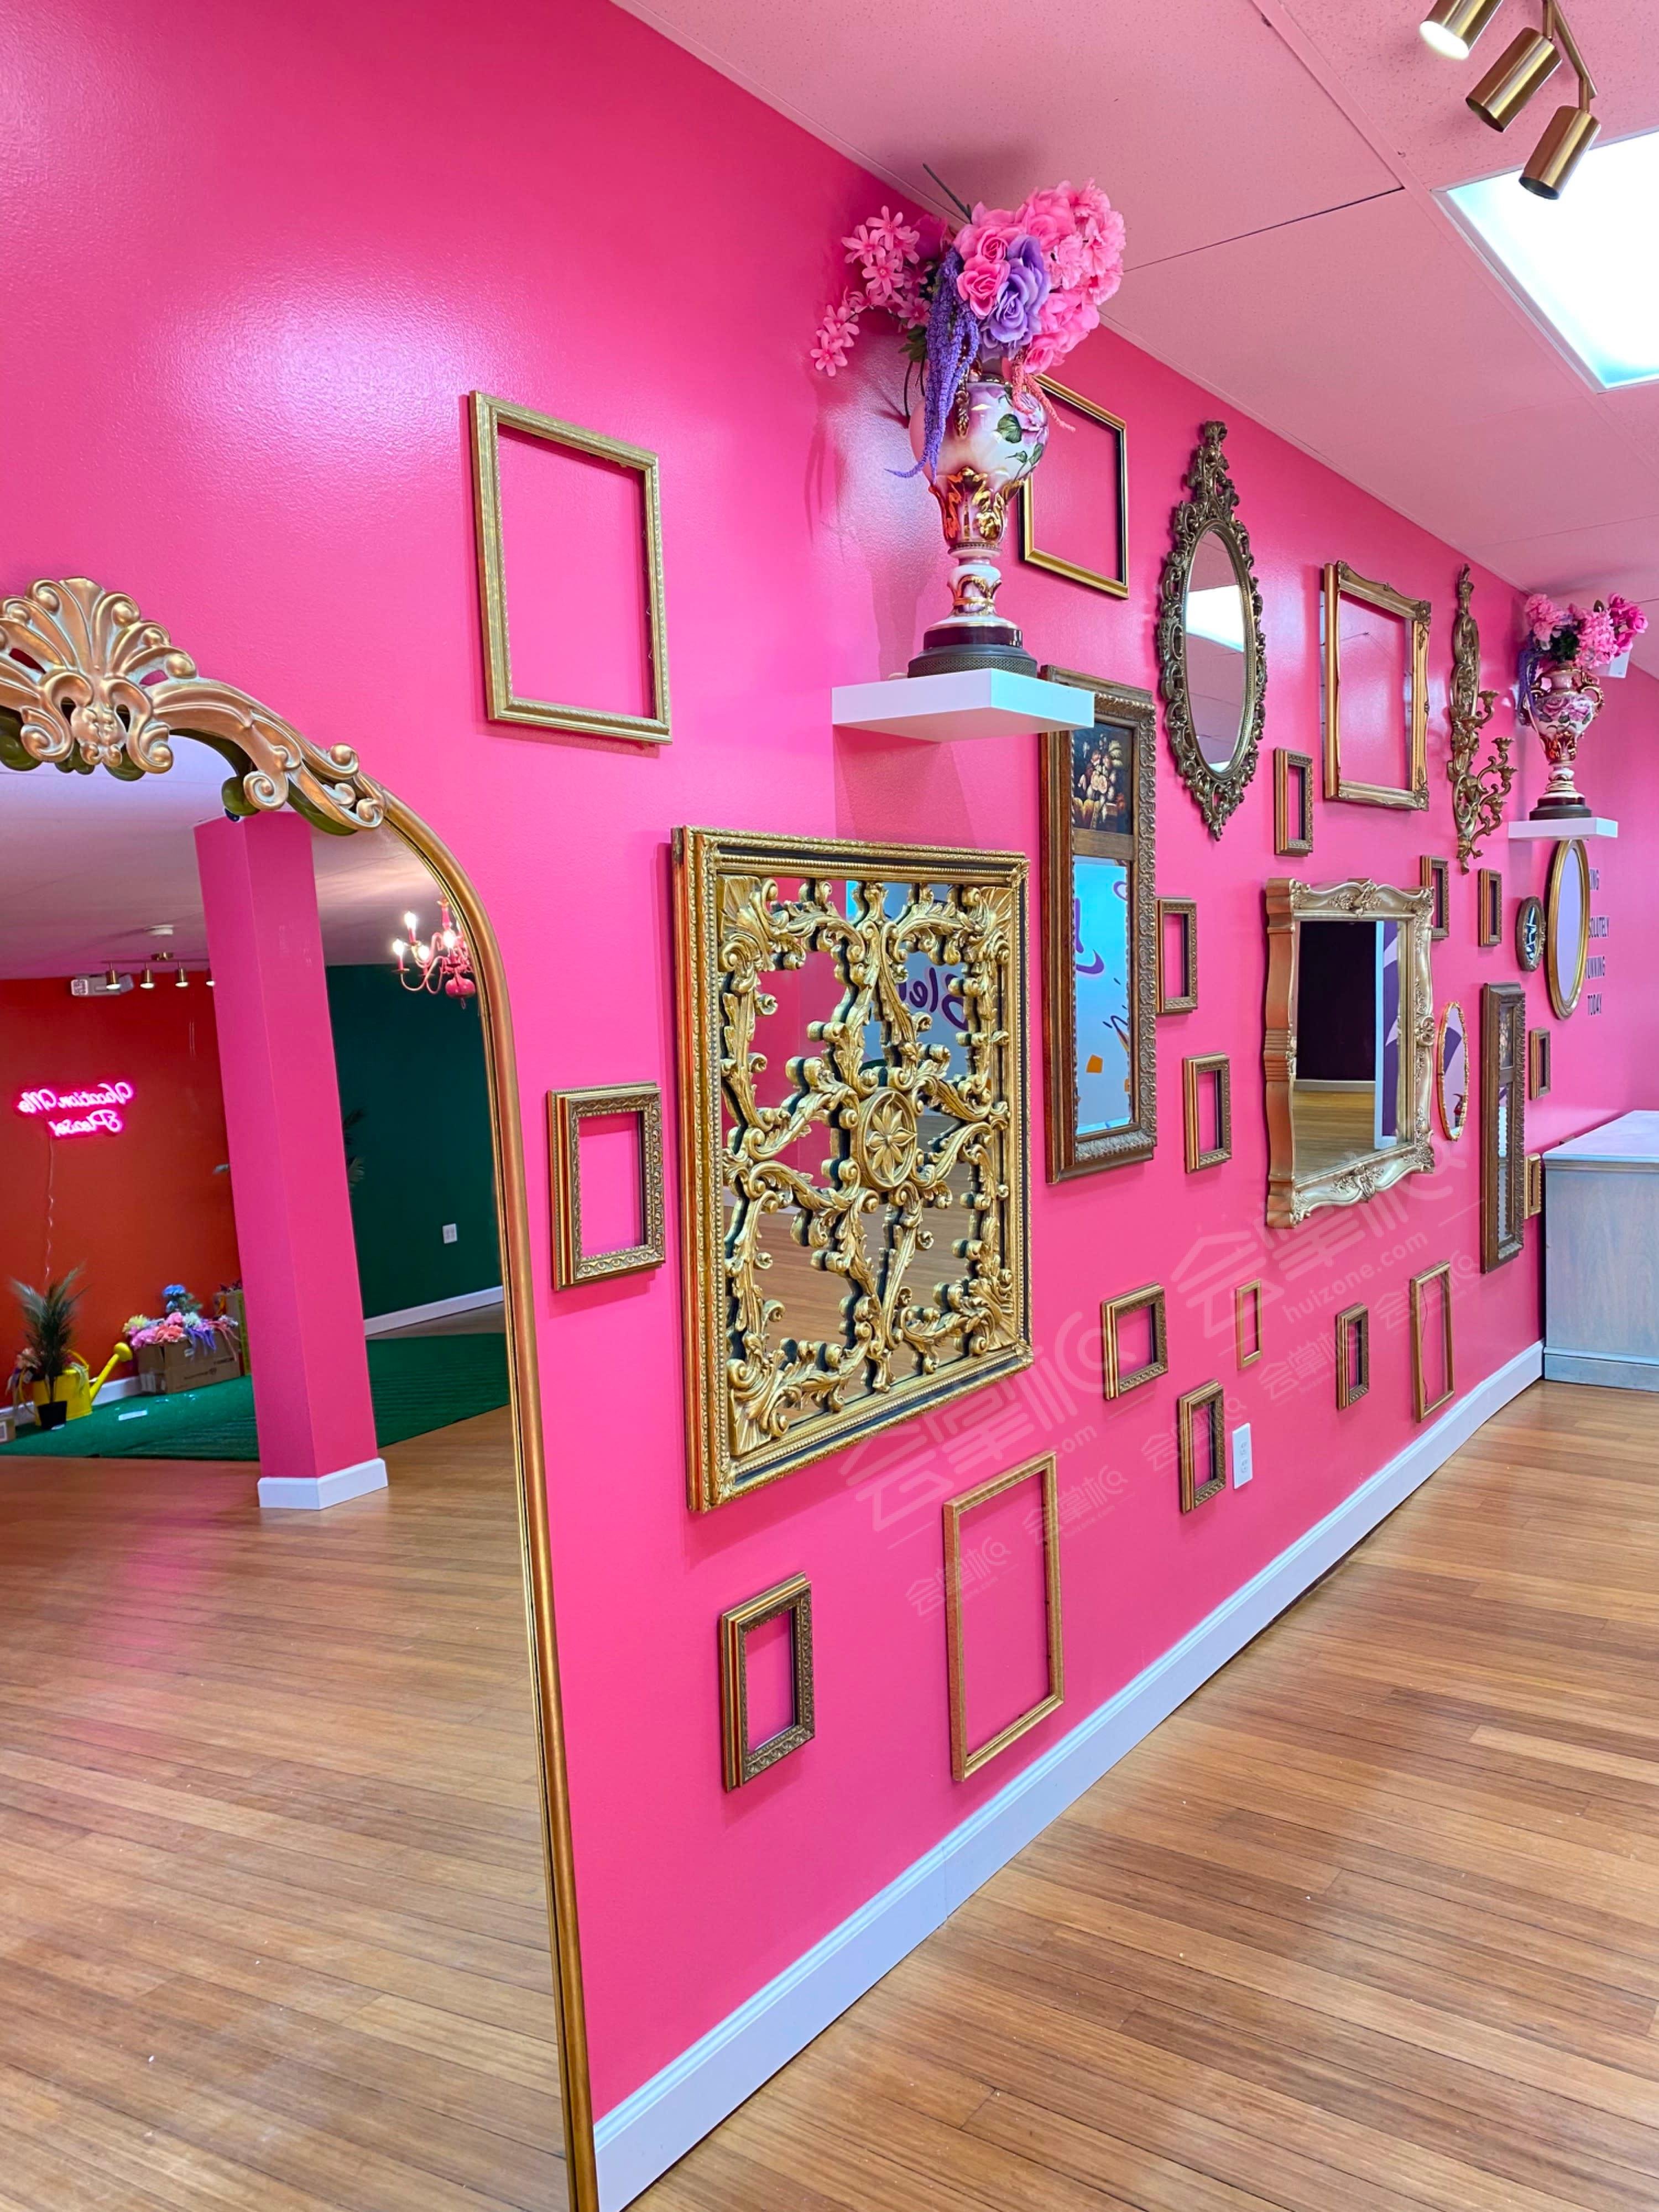 The Pink Art Gallery